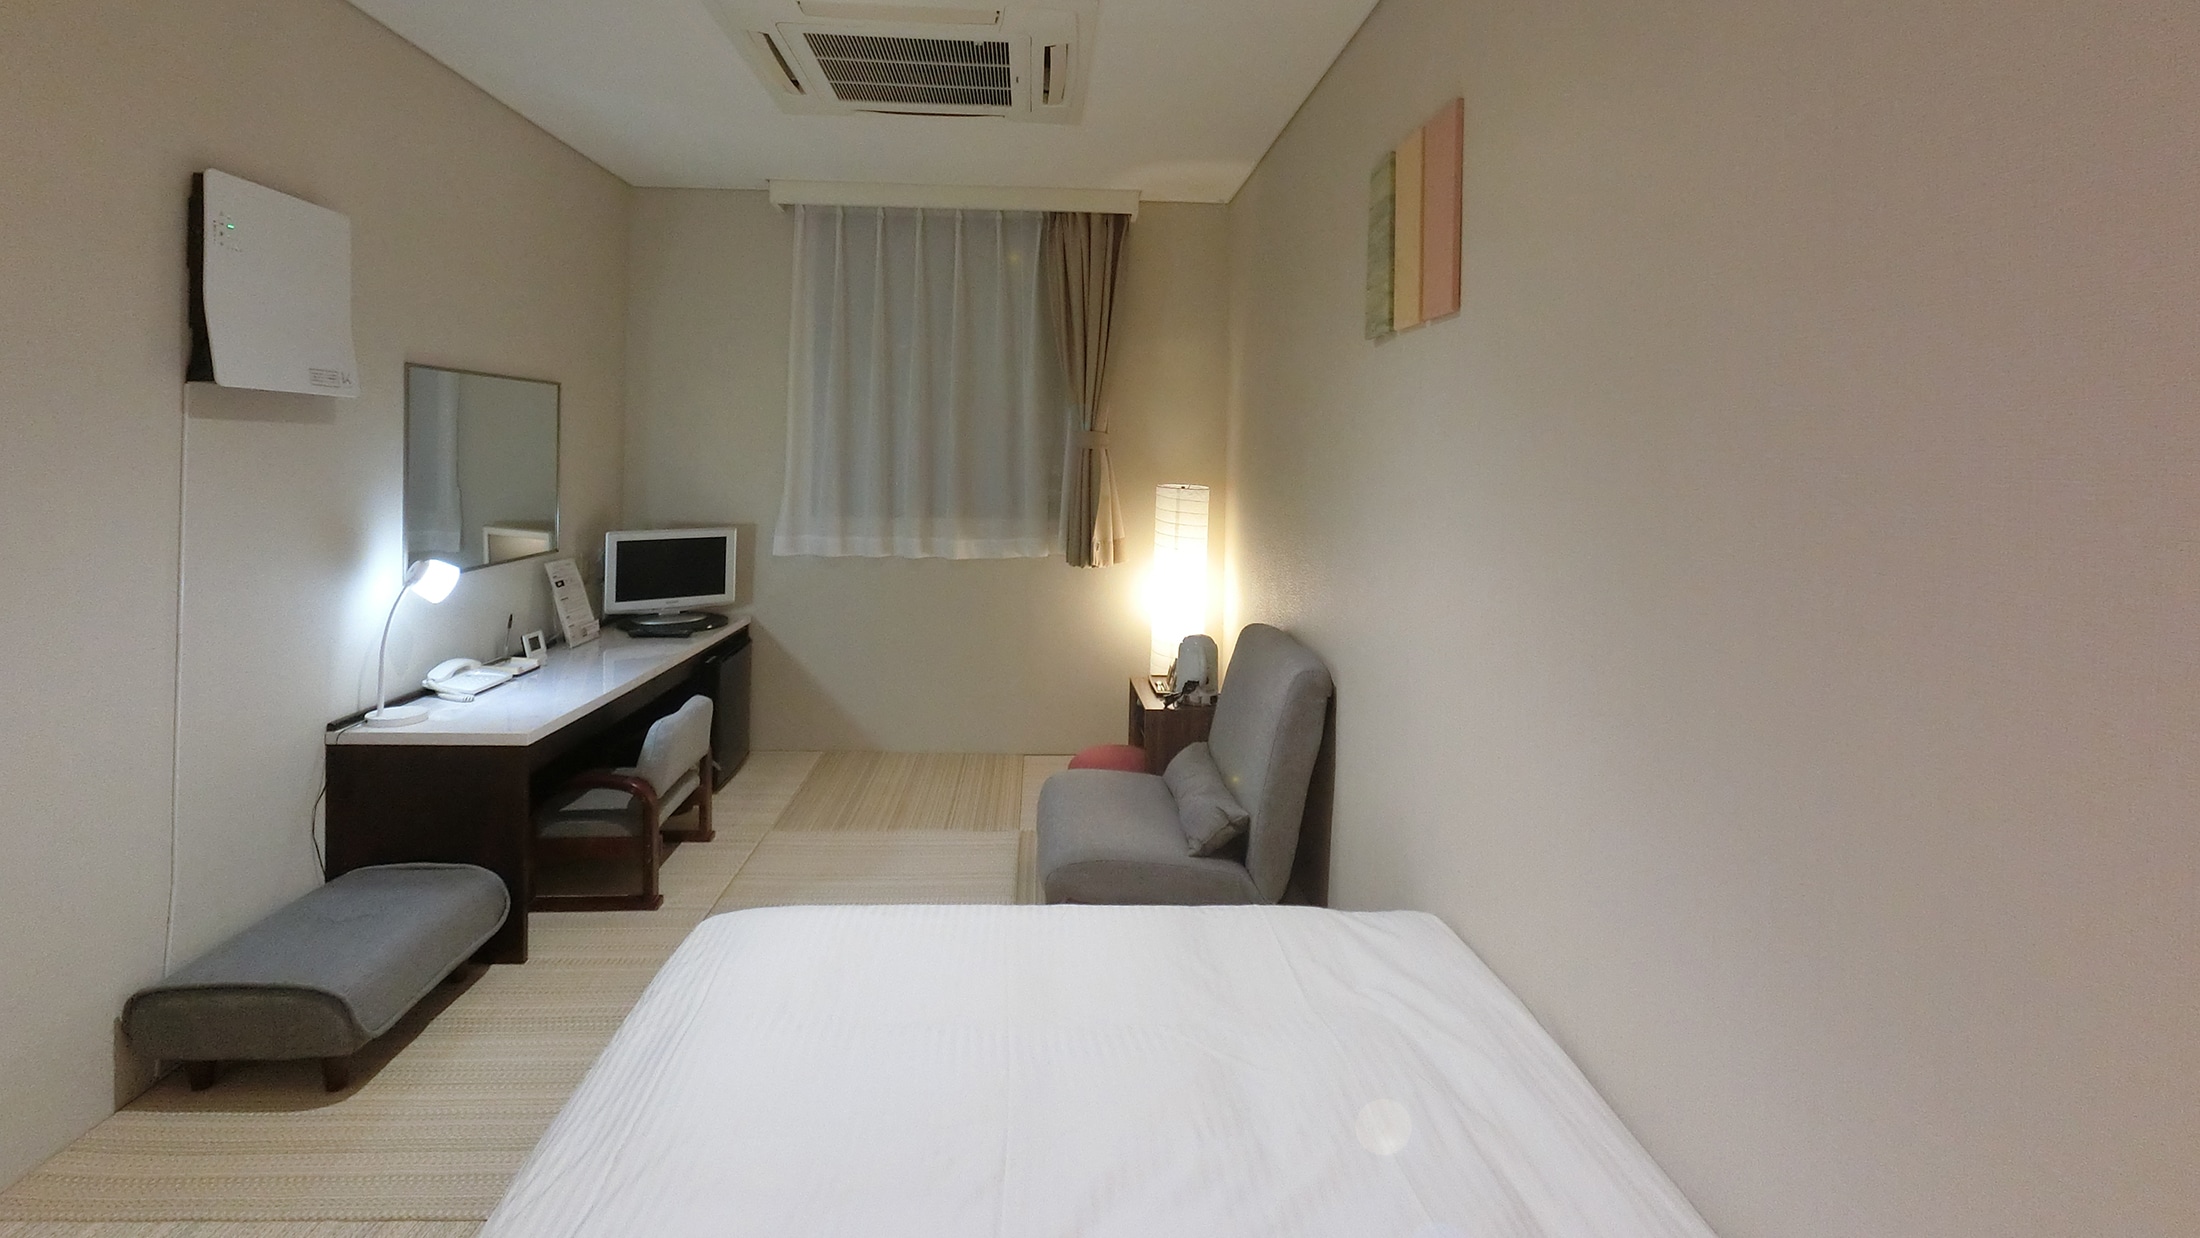 [South Building] Japanese-style double room with Wi-Fi and cable connection A relaxing room with tatami mats around a low-type double bed